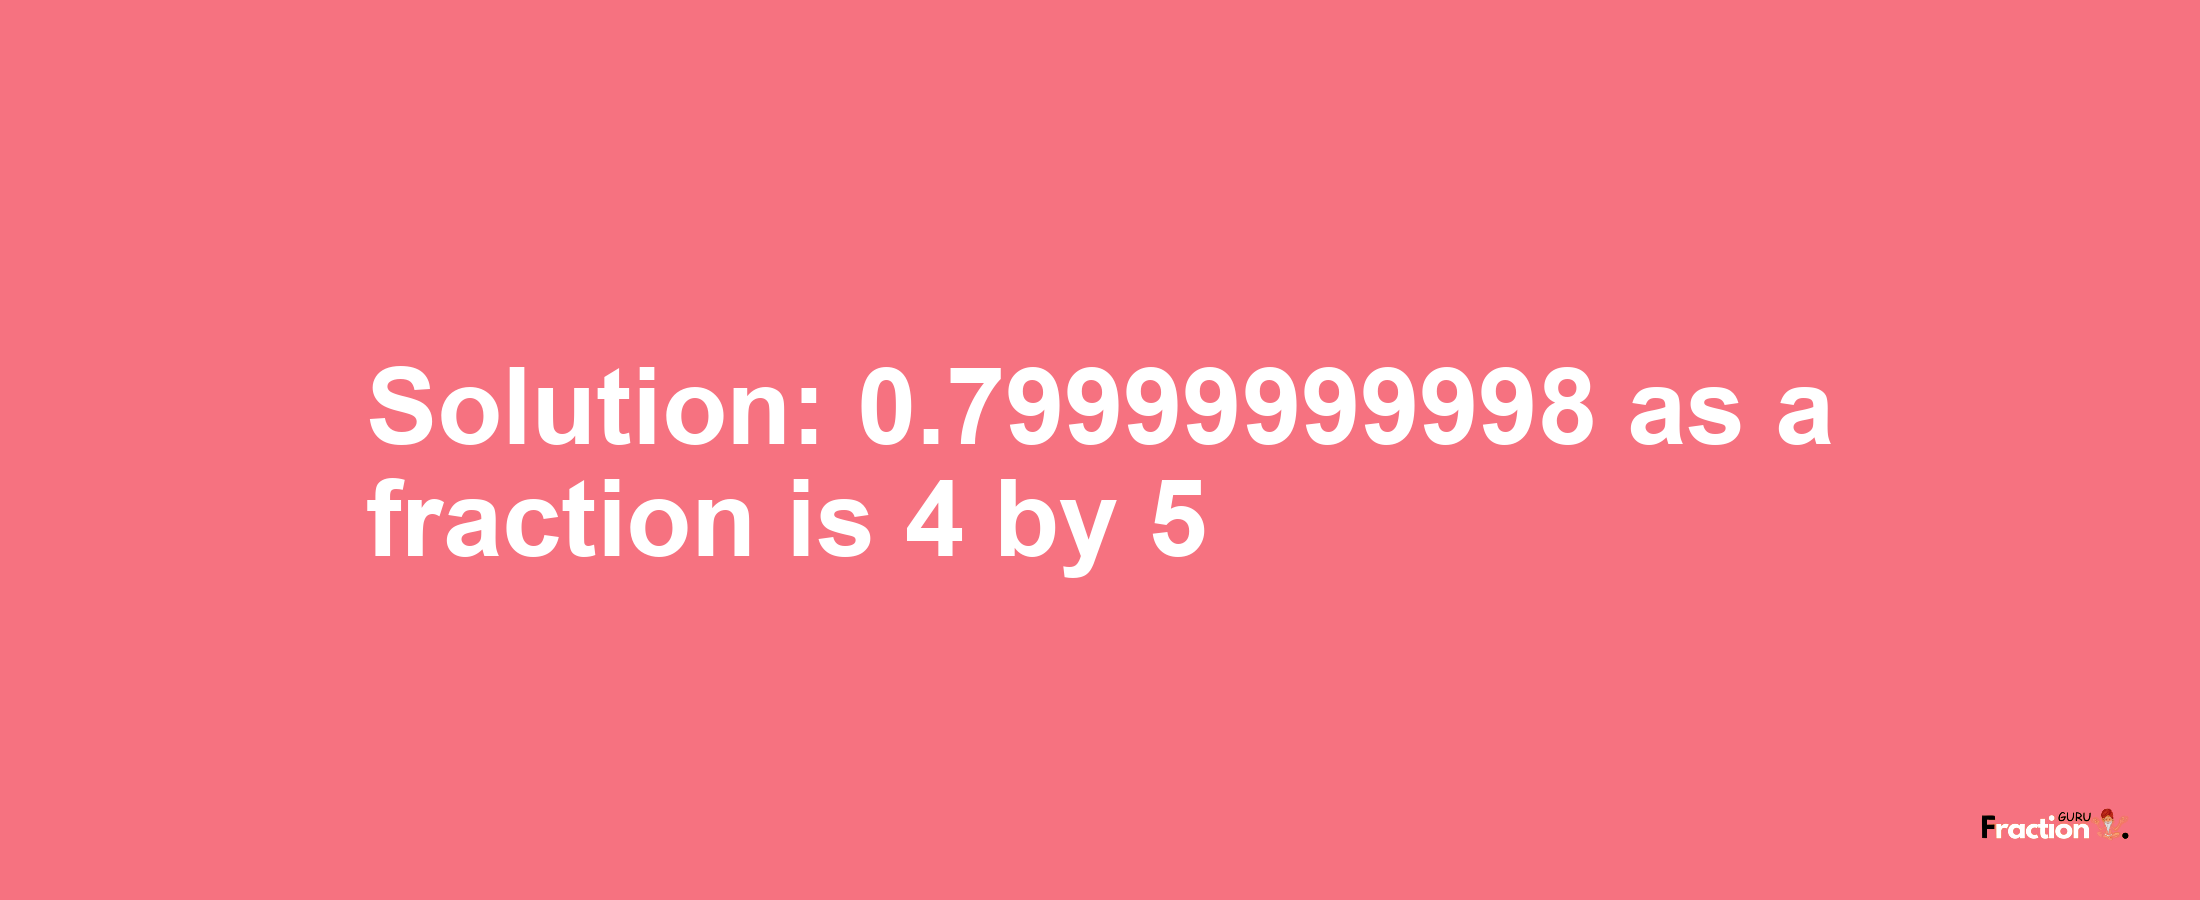 Solution:0.79999999998 as a fraction is 4/5